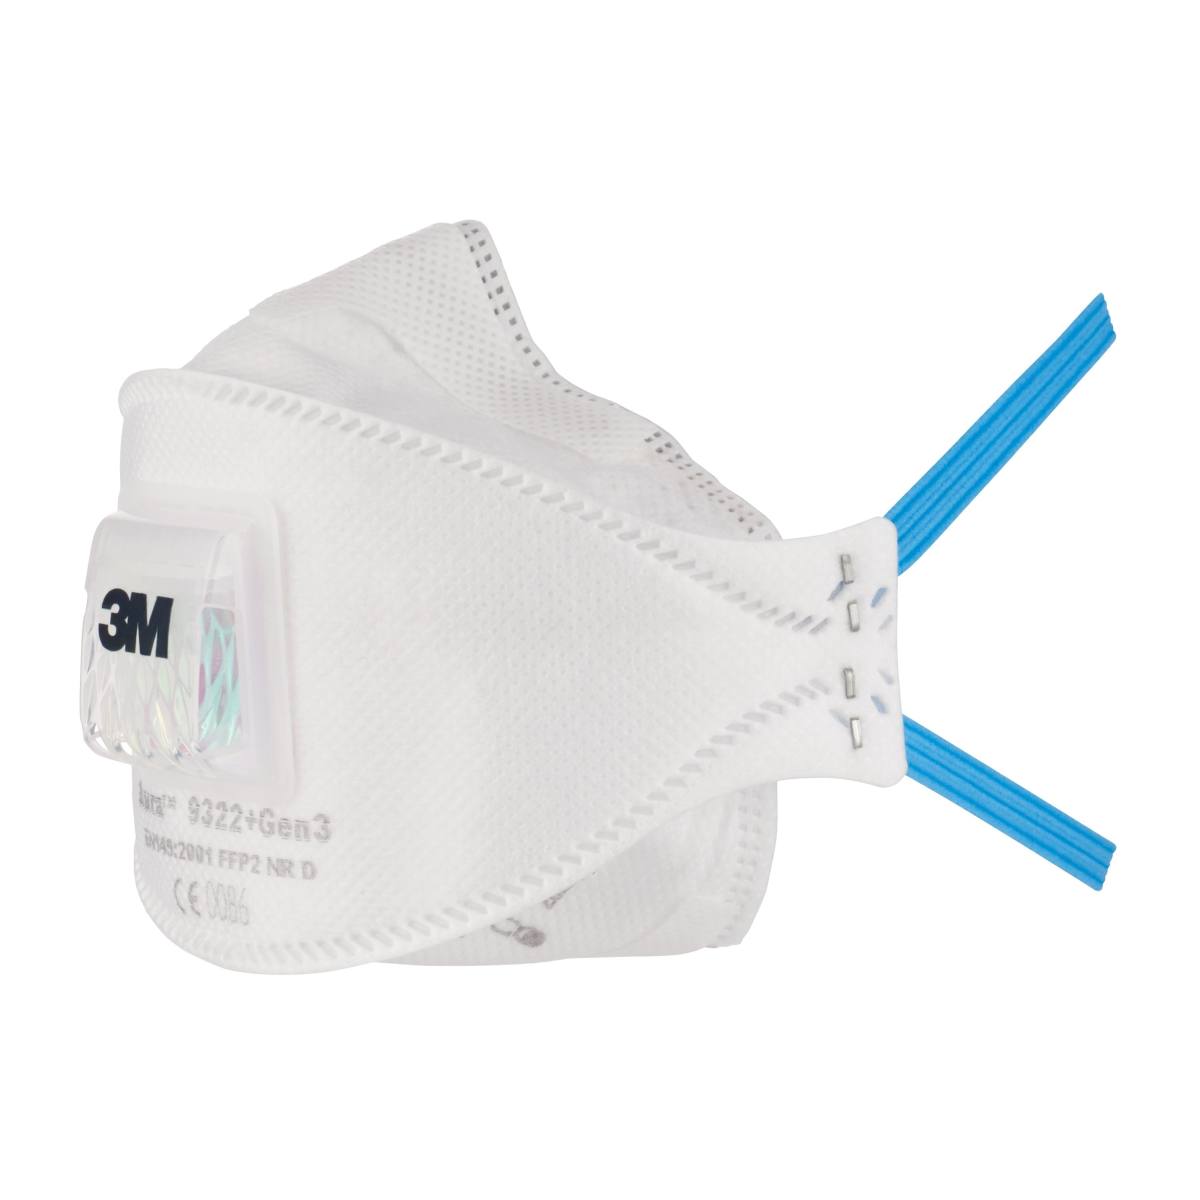 3M 9322+ Gen3 SV Aura Respirator FFP2 with cool-flow exhalation valve, up to 10 times the limit value (hygienically individually packaged), small pack